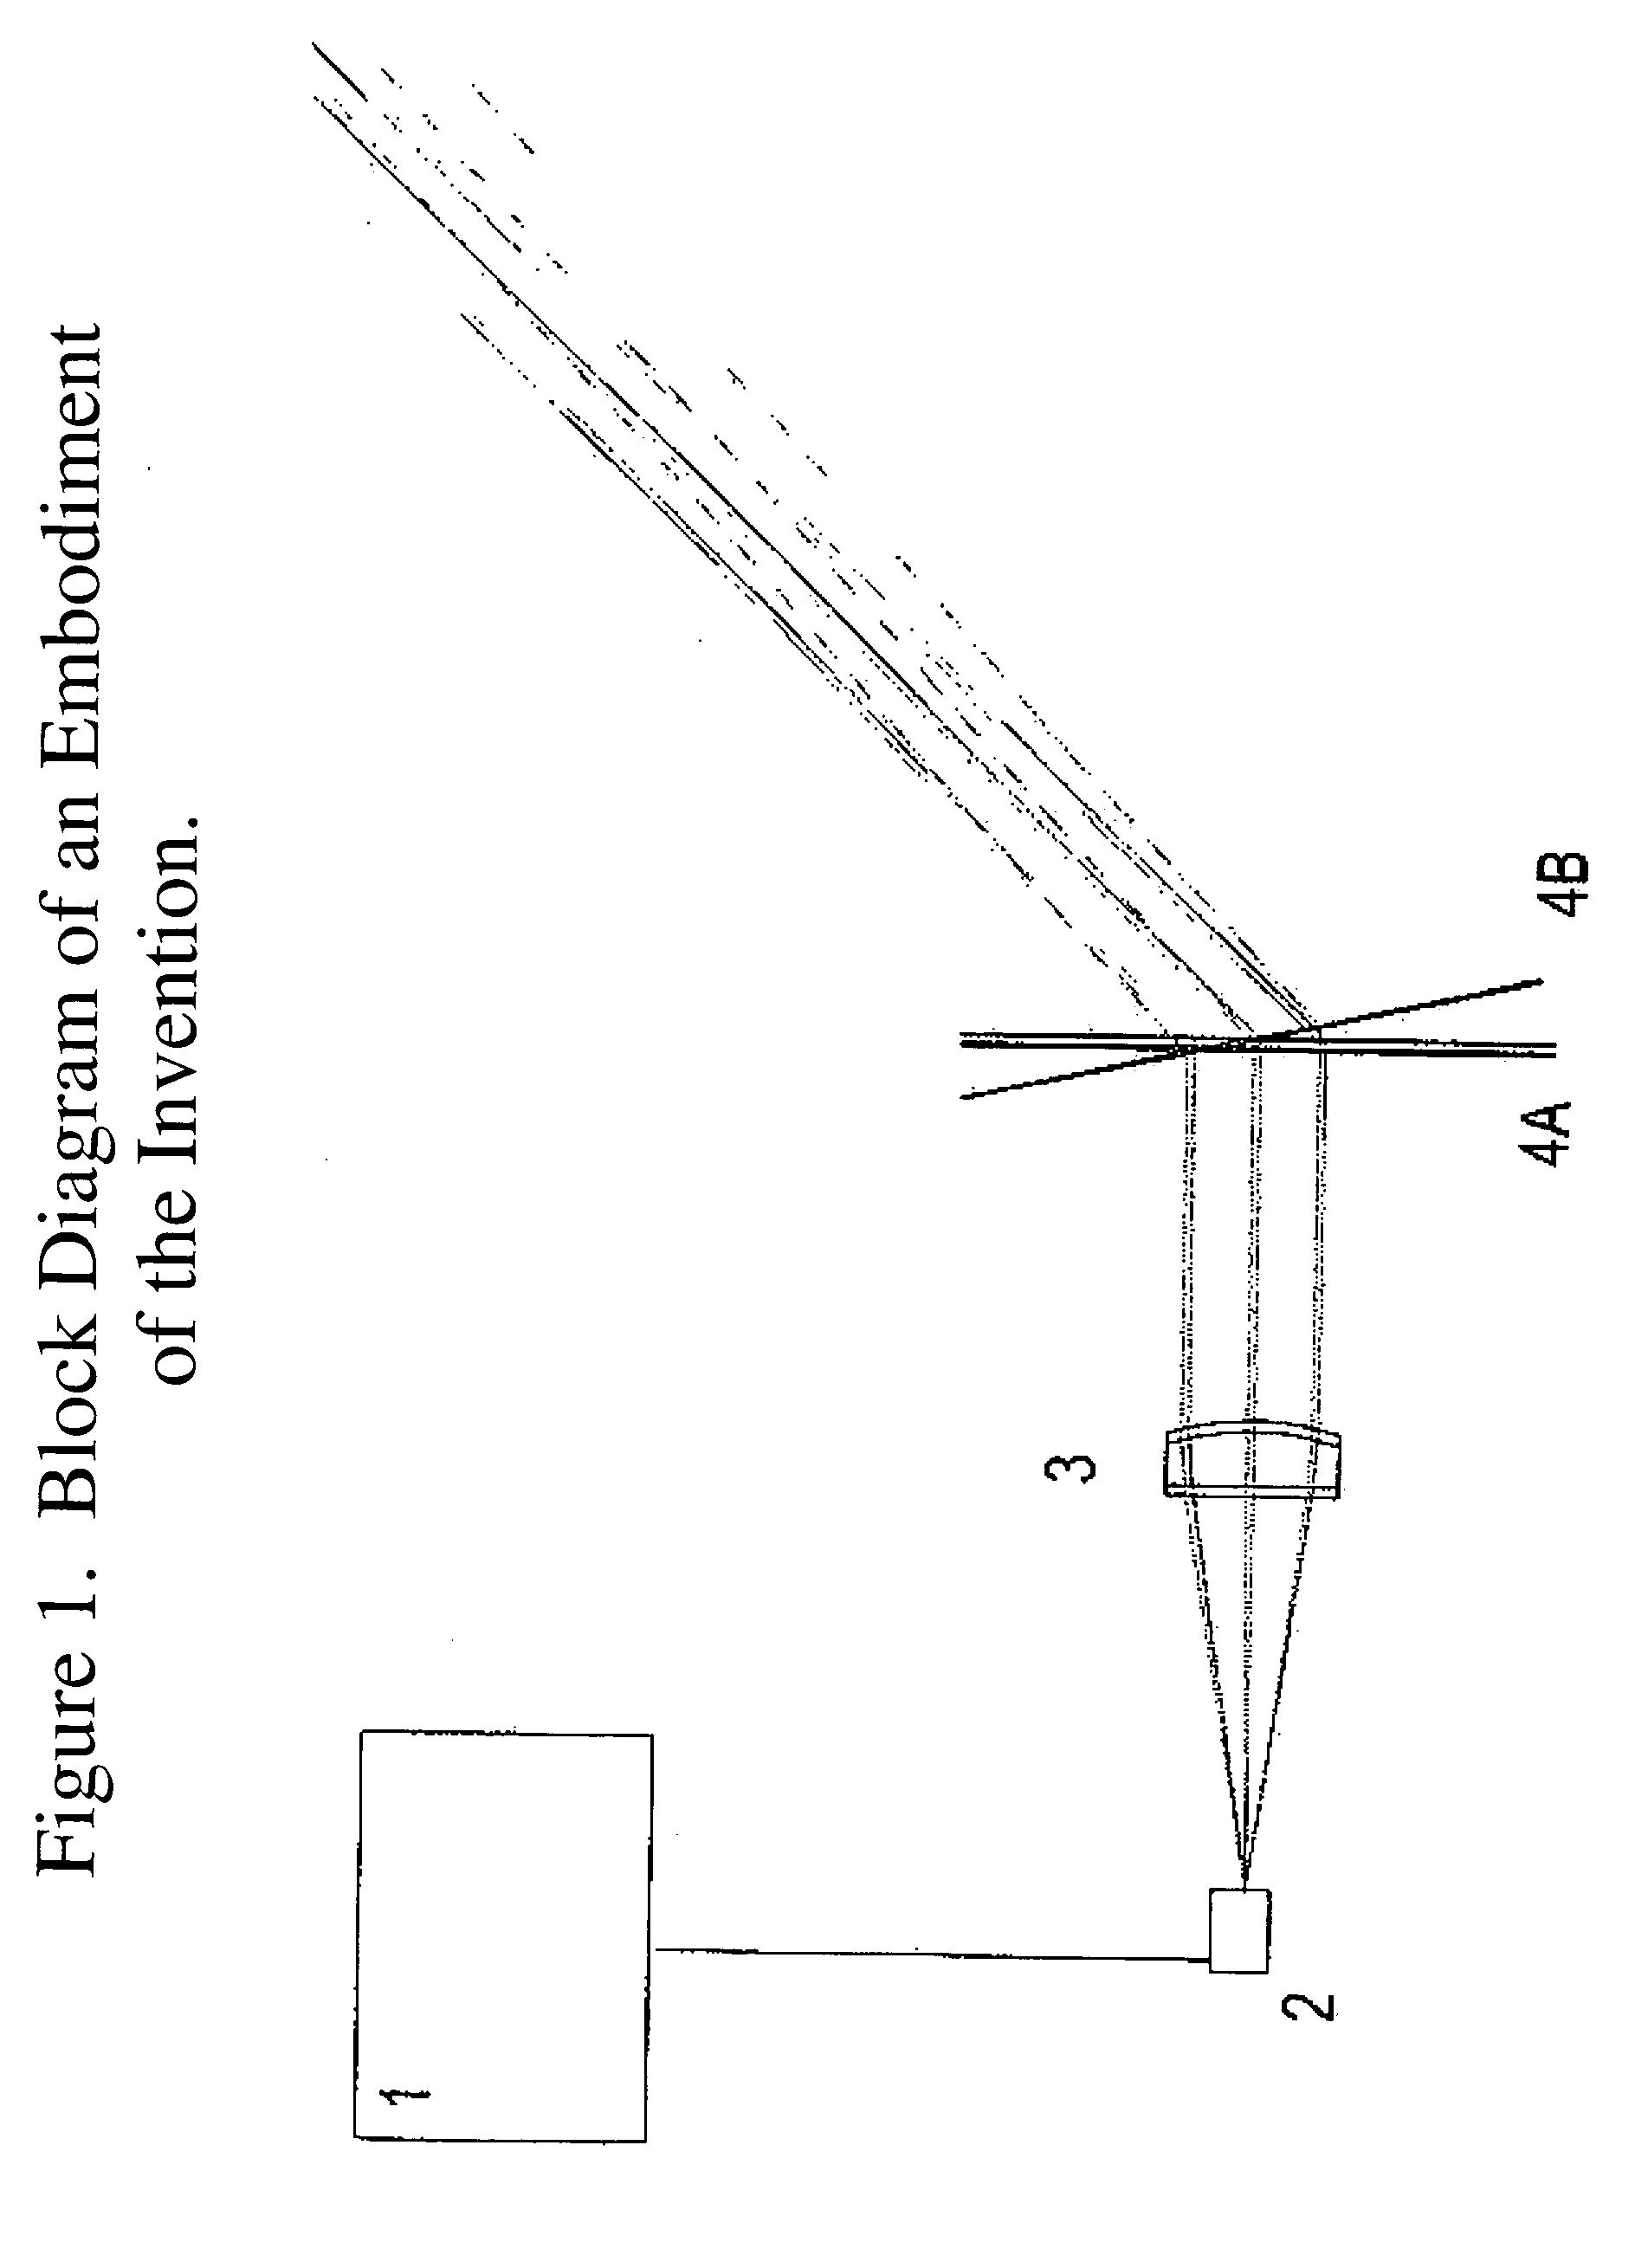 Enhanced bioavailability of nutrients, pharmaceutical agents, and other bioactive substances through laser resonant homogenization or modification of molecular shape or crystalline form